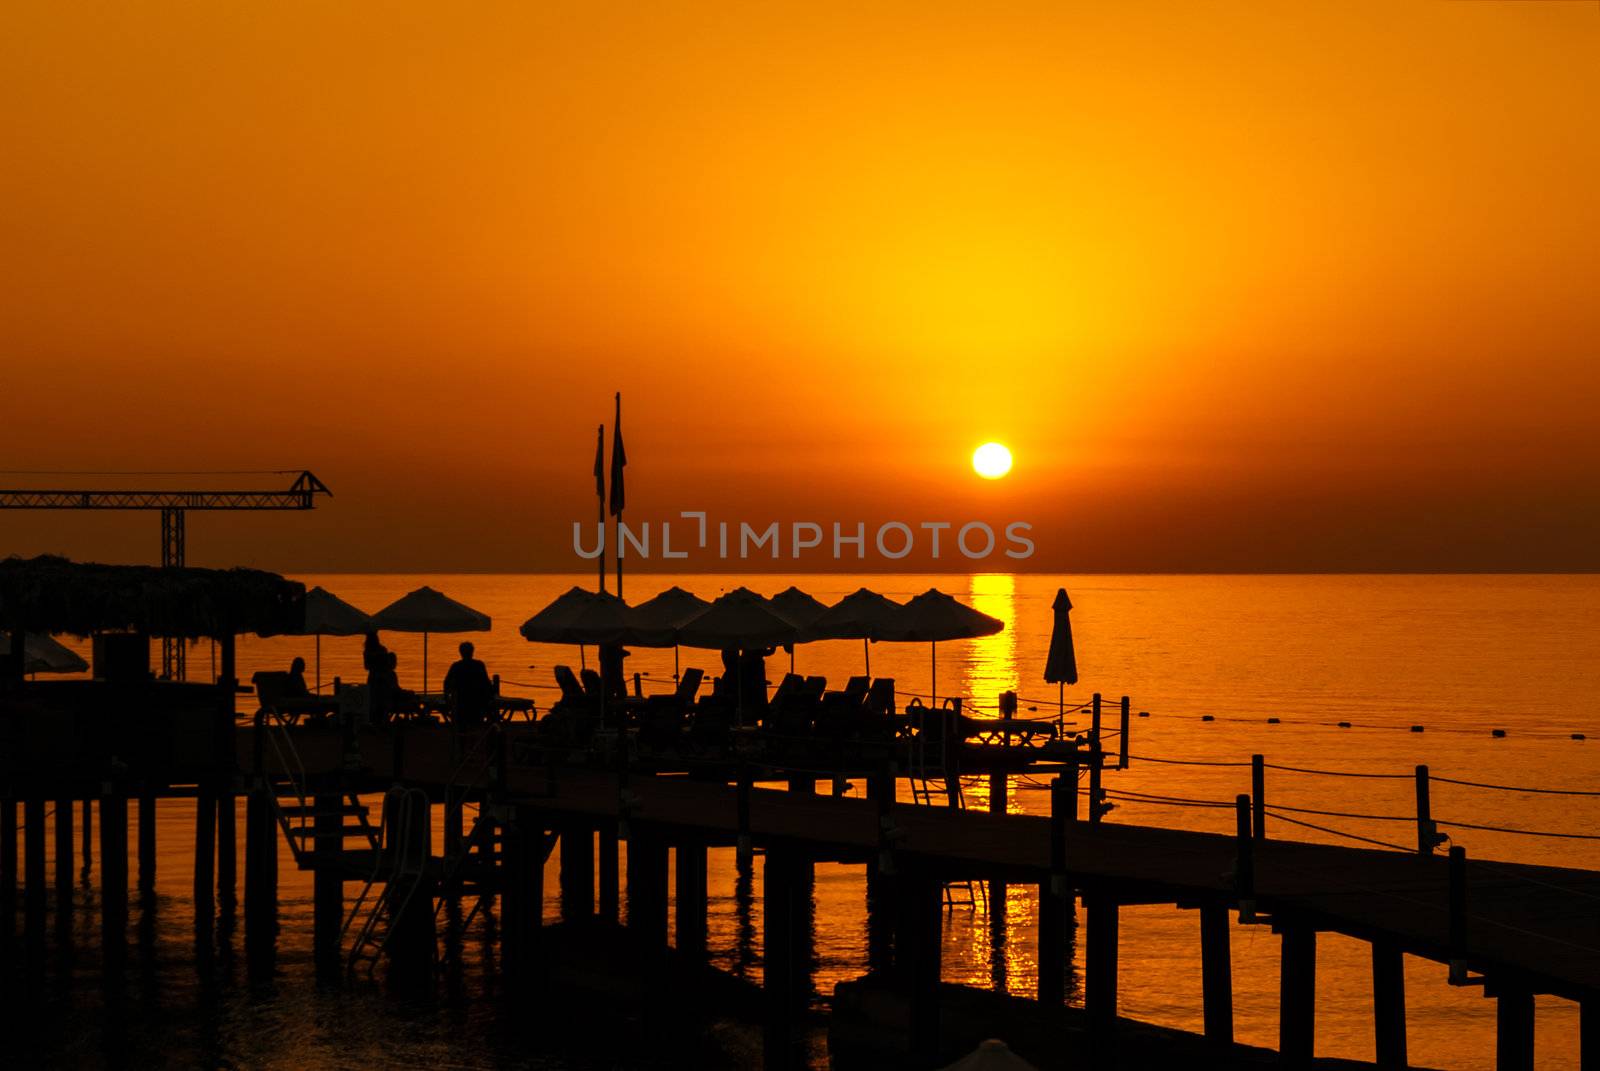 Pier Resort Silhouette at the Sunrise by kirs-ua